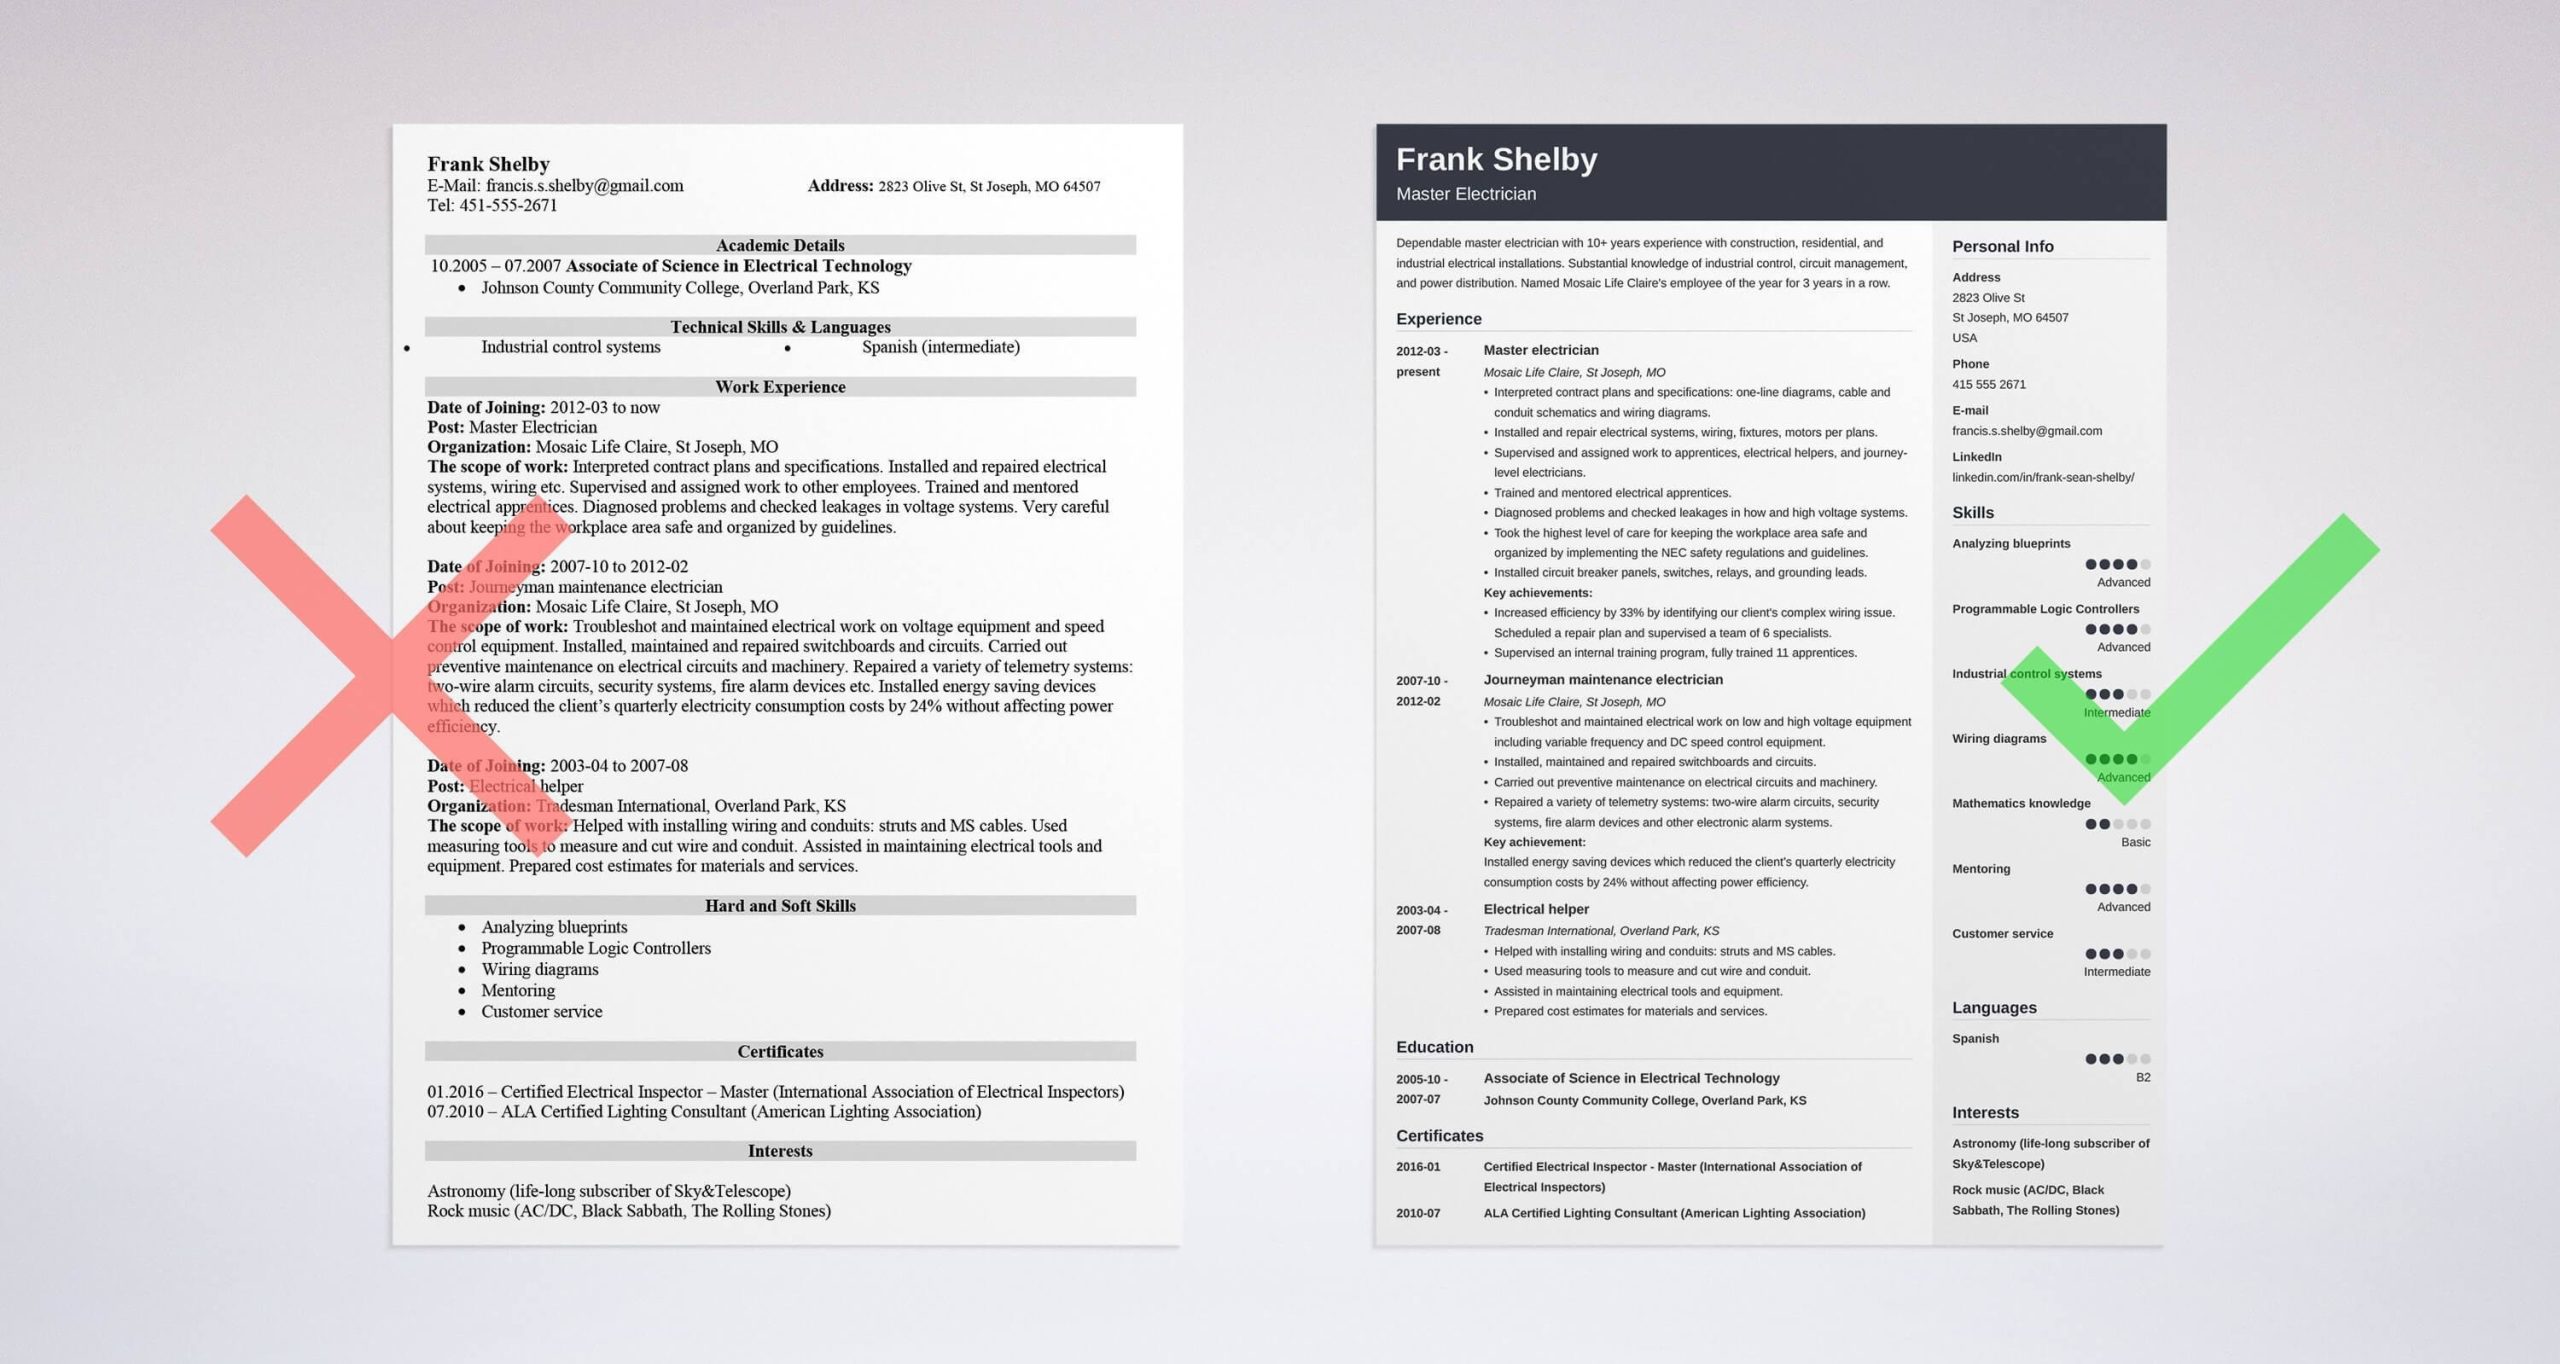 Sample Of A Good Resume Applying for A Electrician Electrician Resume Examples: Apprentice, Journeyman, Master